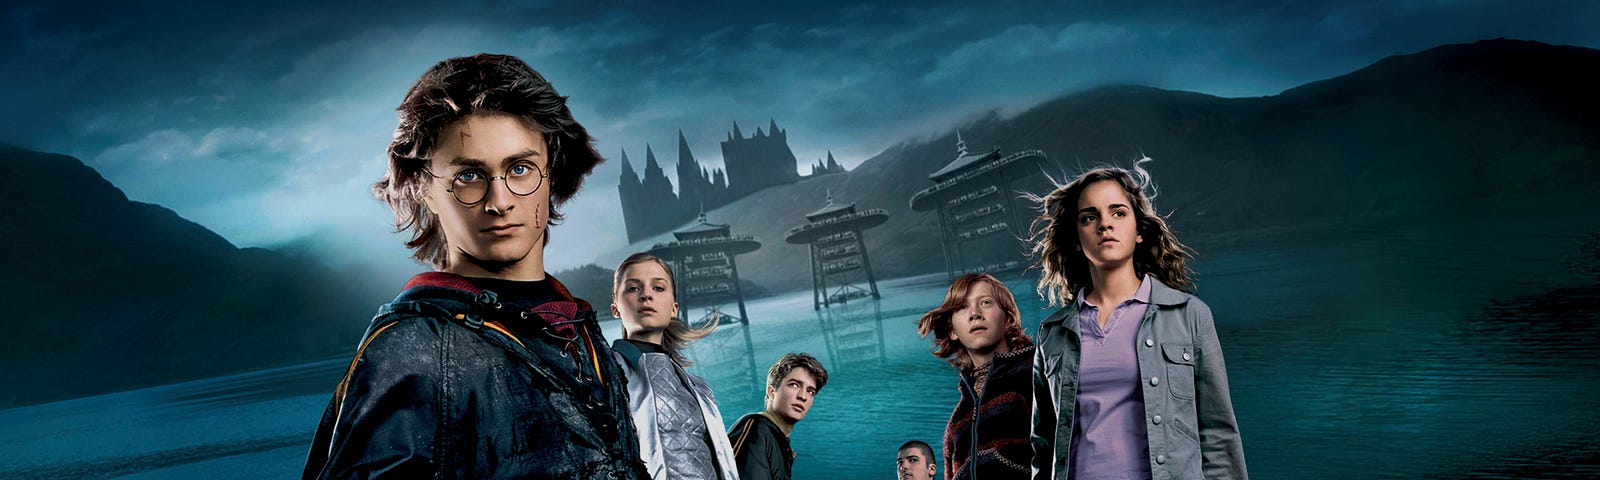 harry potter and the goblet of fire full movie online